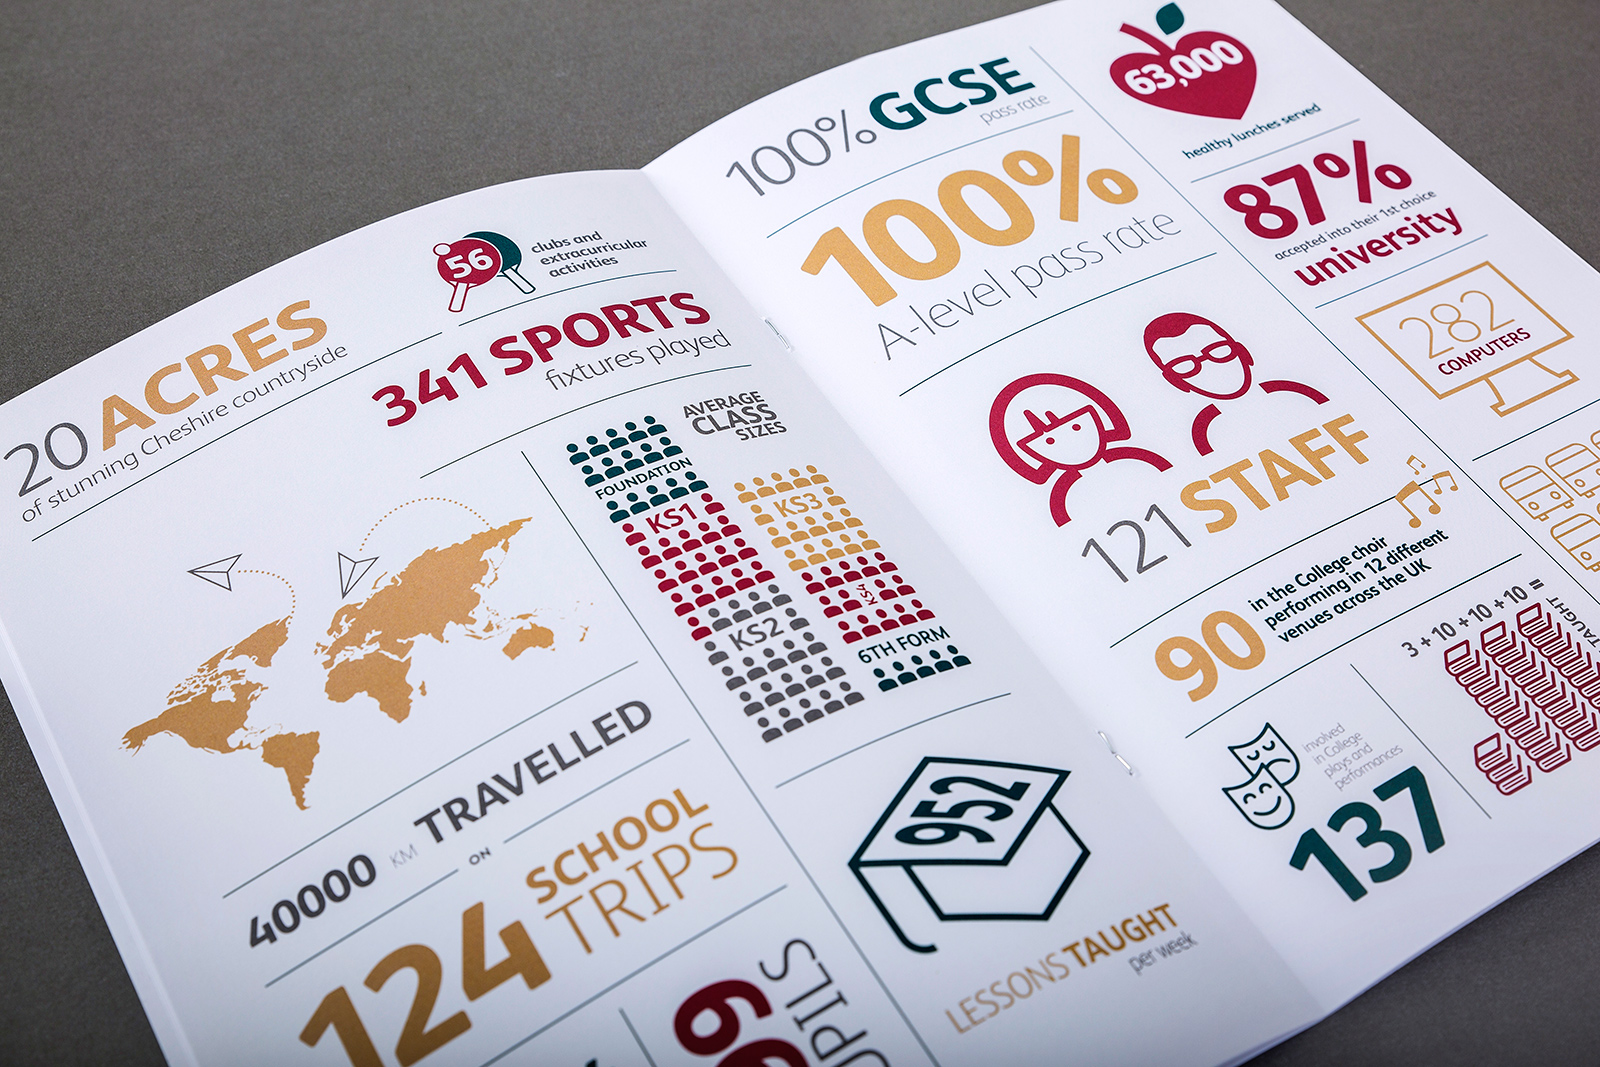 Abbey Gate College Prospectus designed by Absolute